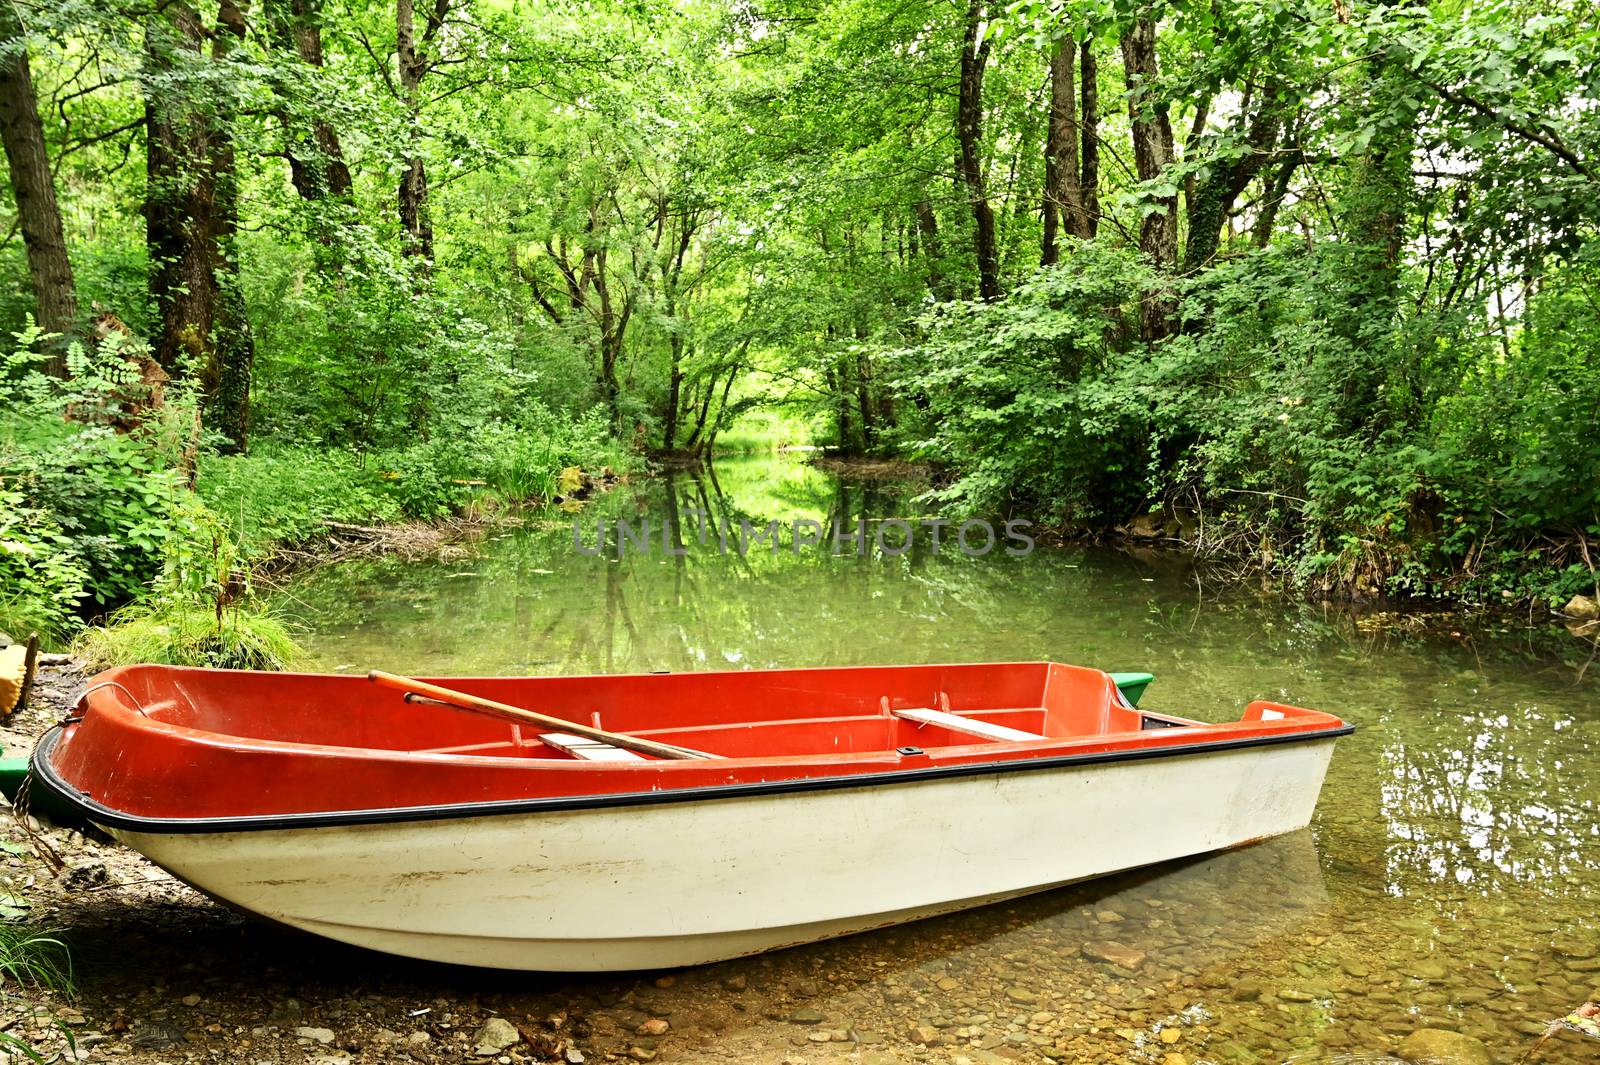 An old fishing boat, in a small stream with a dense forest